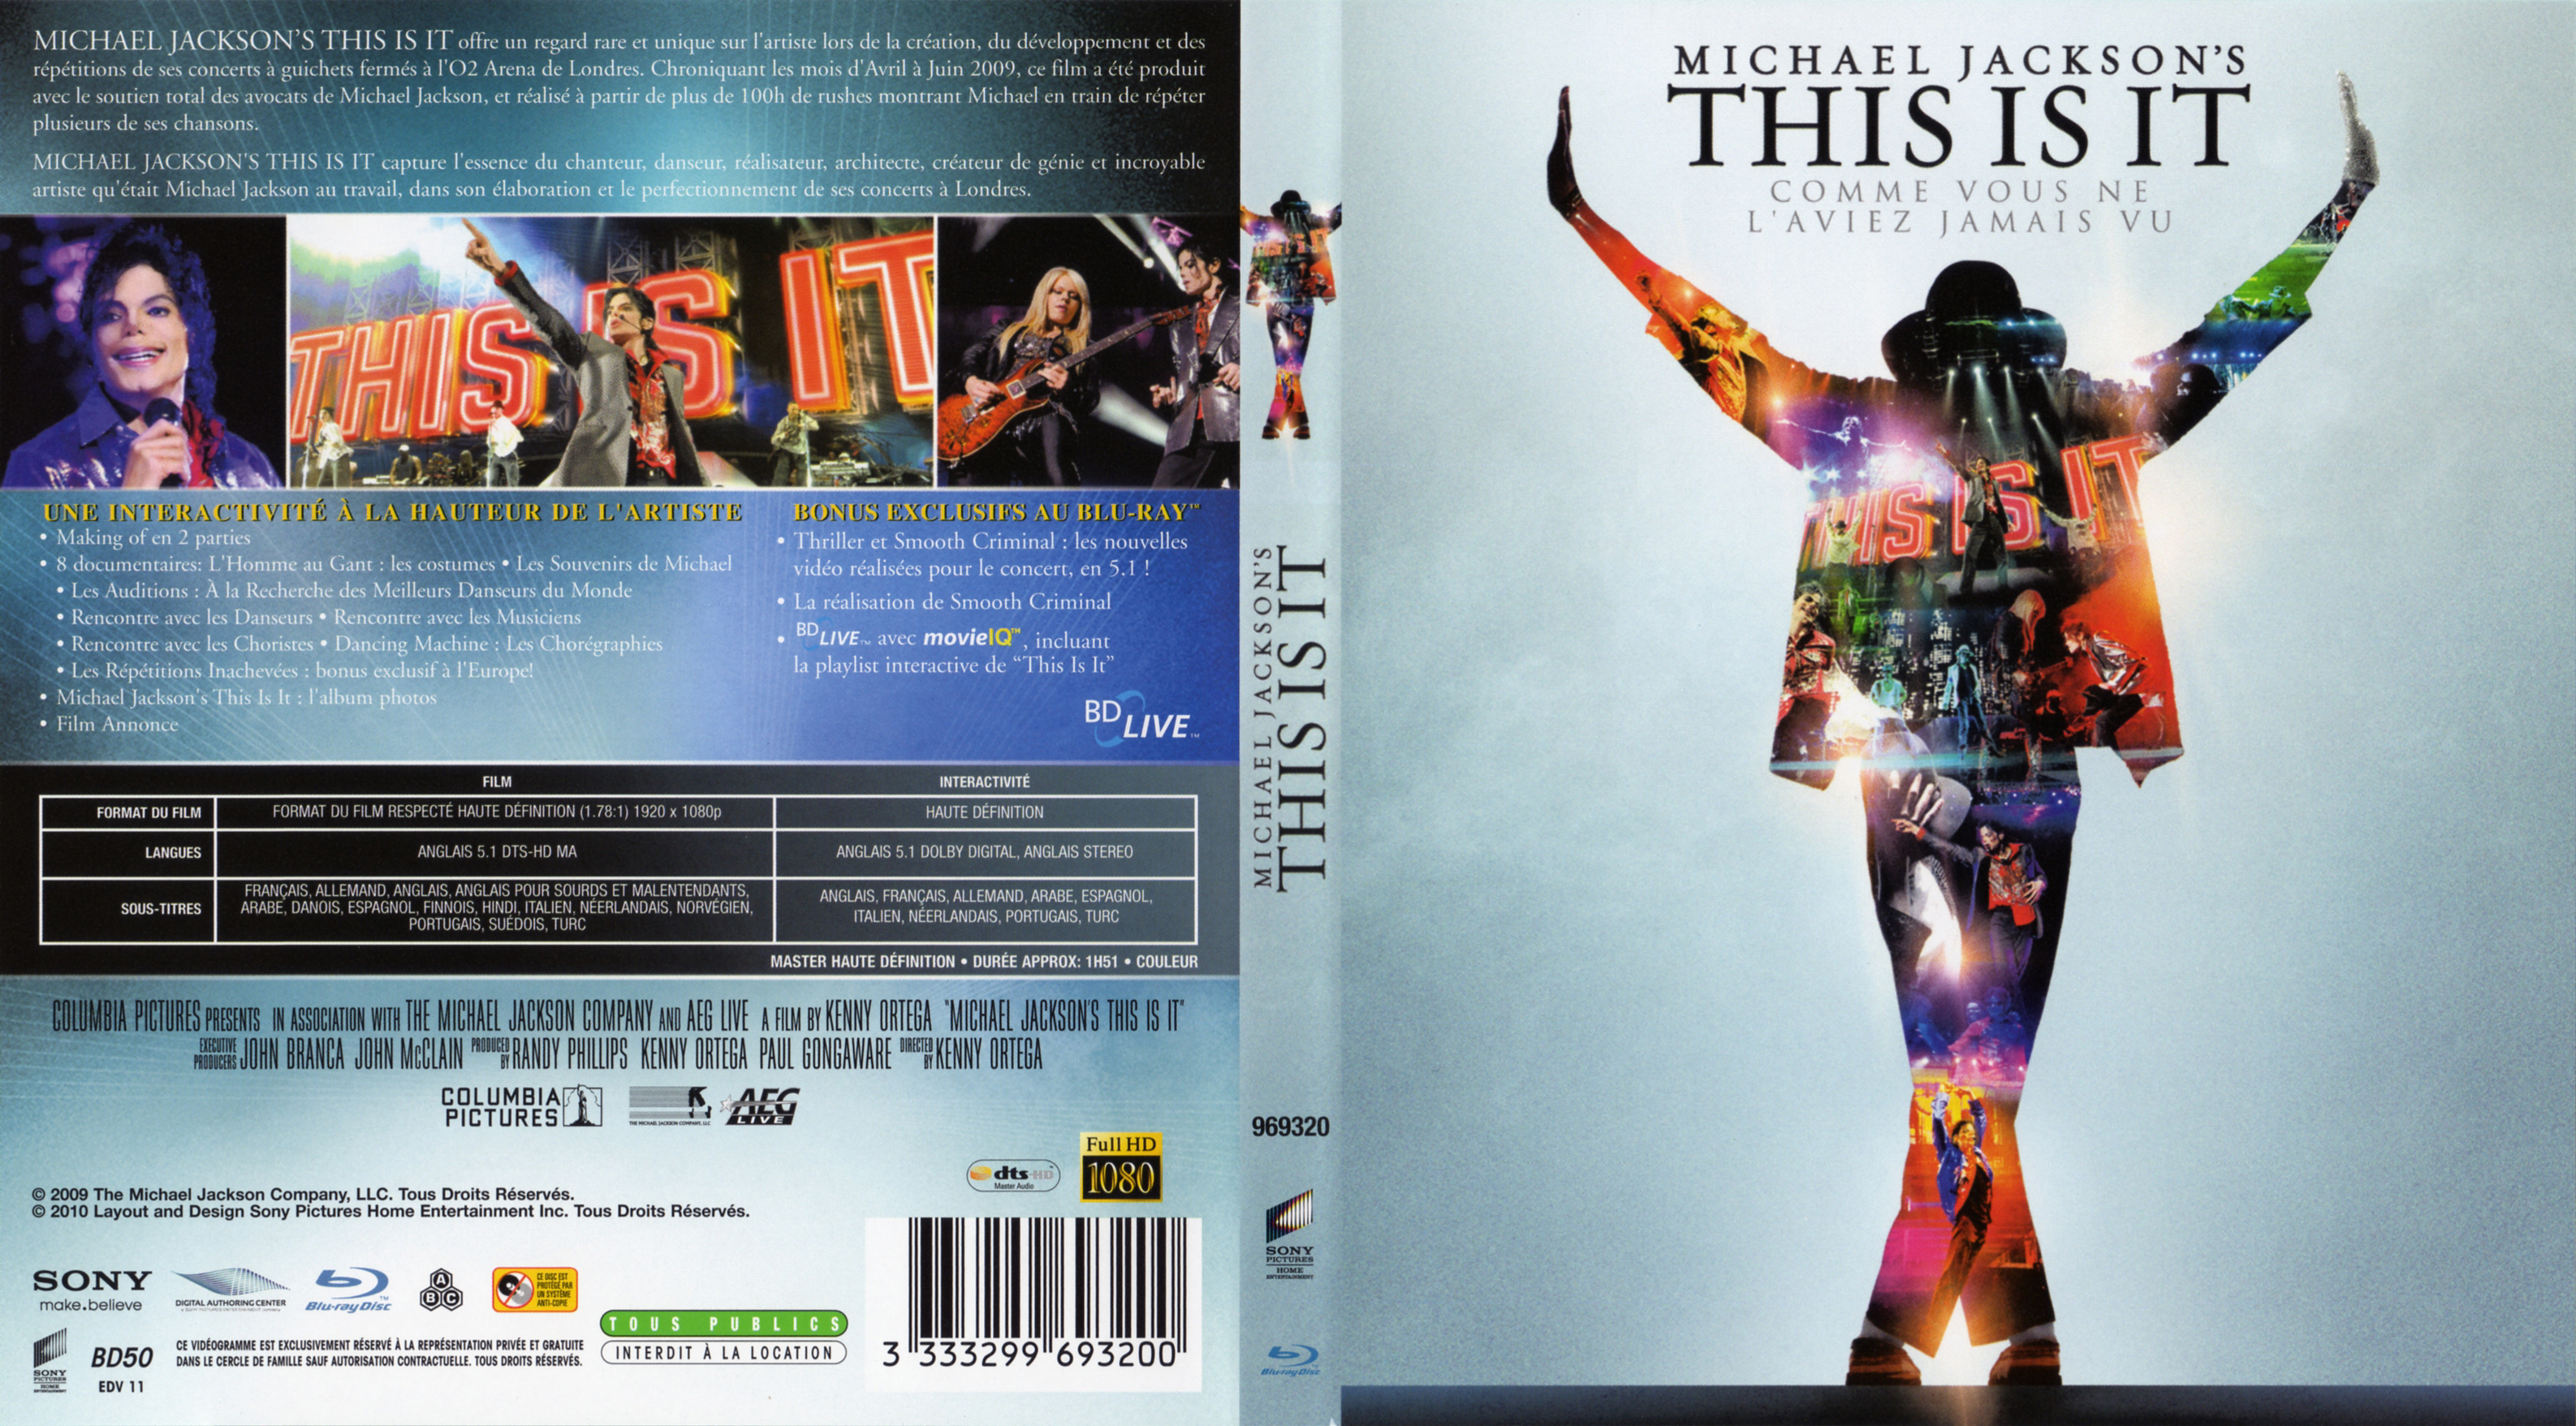 Jaquette DVD This is it (BLU-RAY)